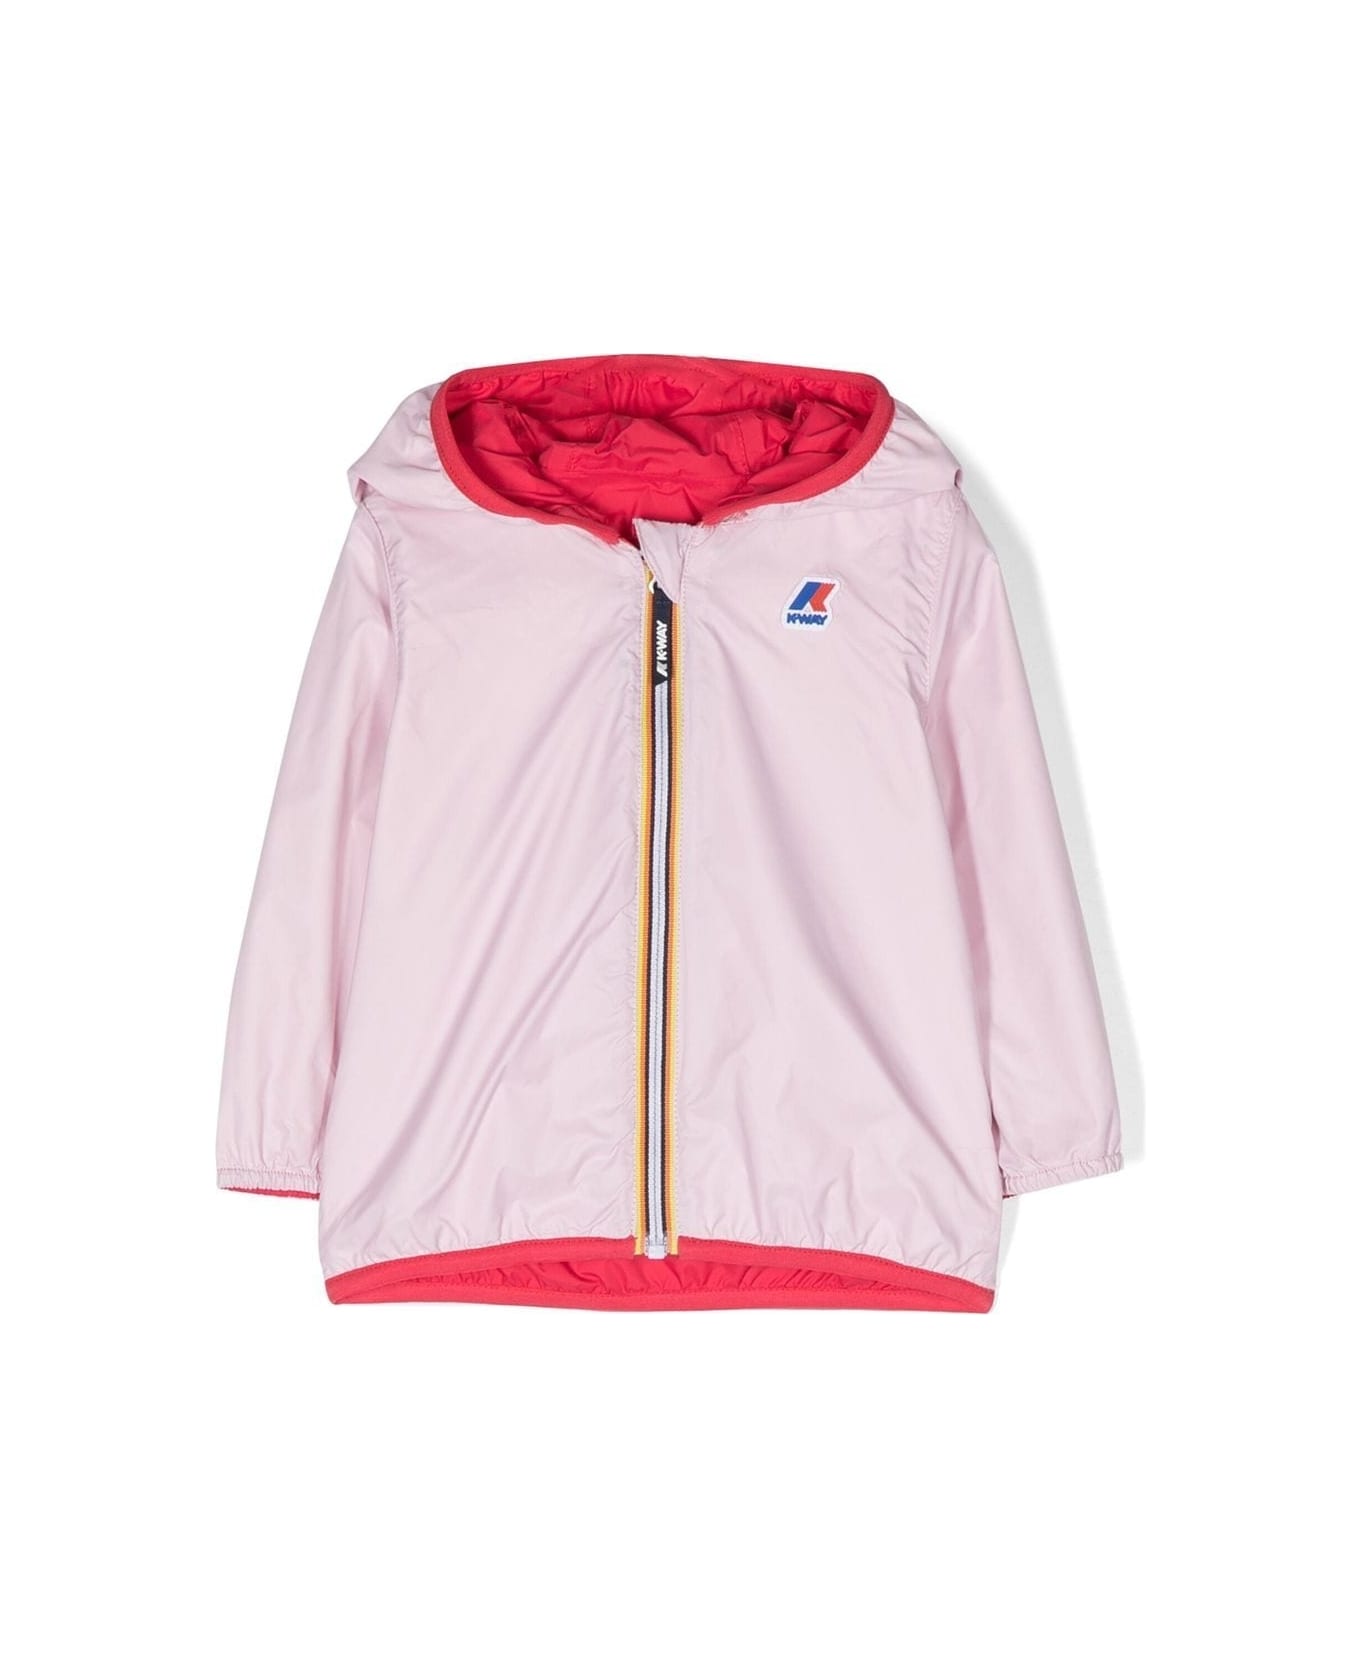 K-Way Jacket With Hood - Red